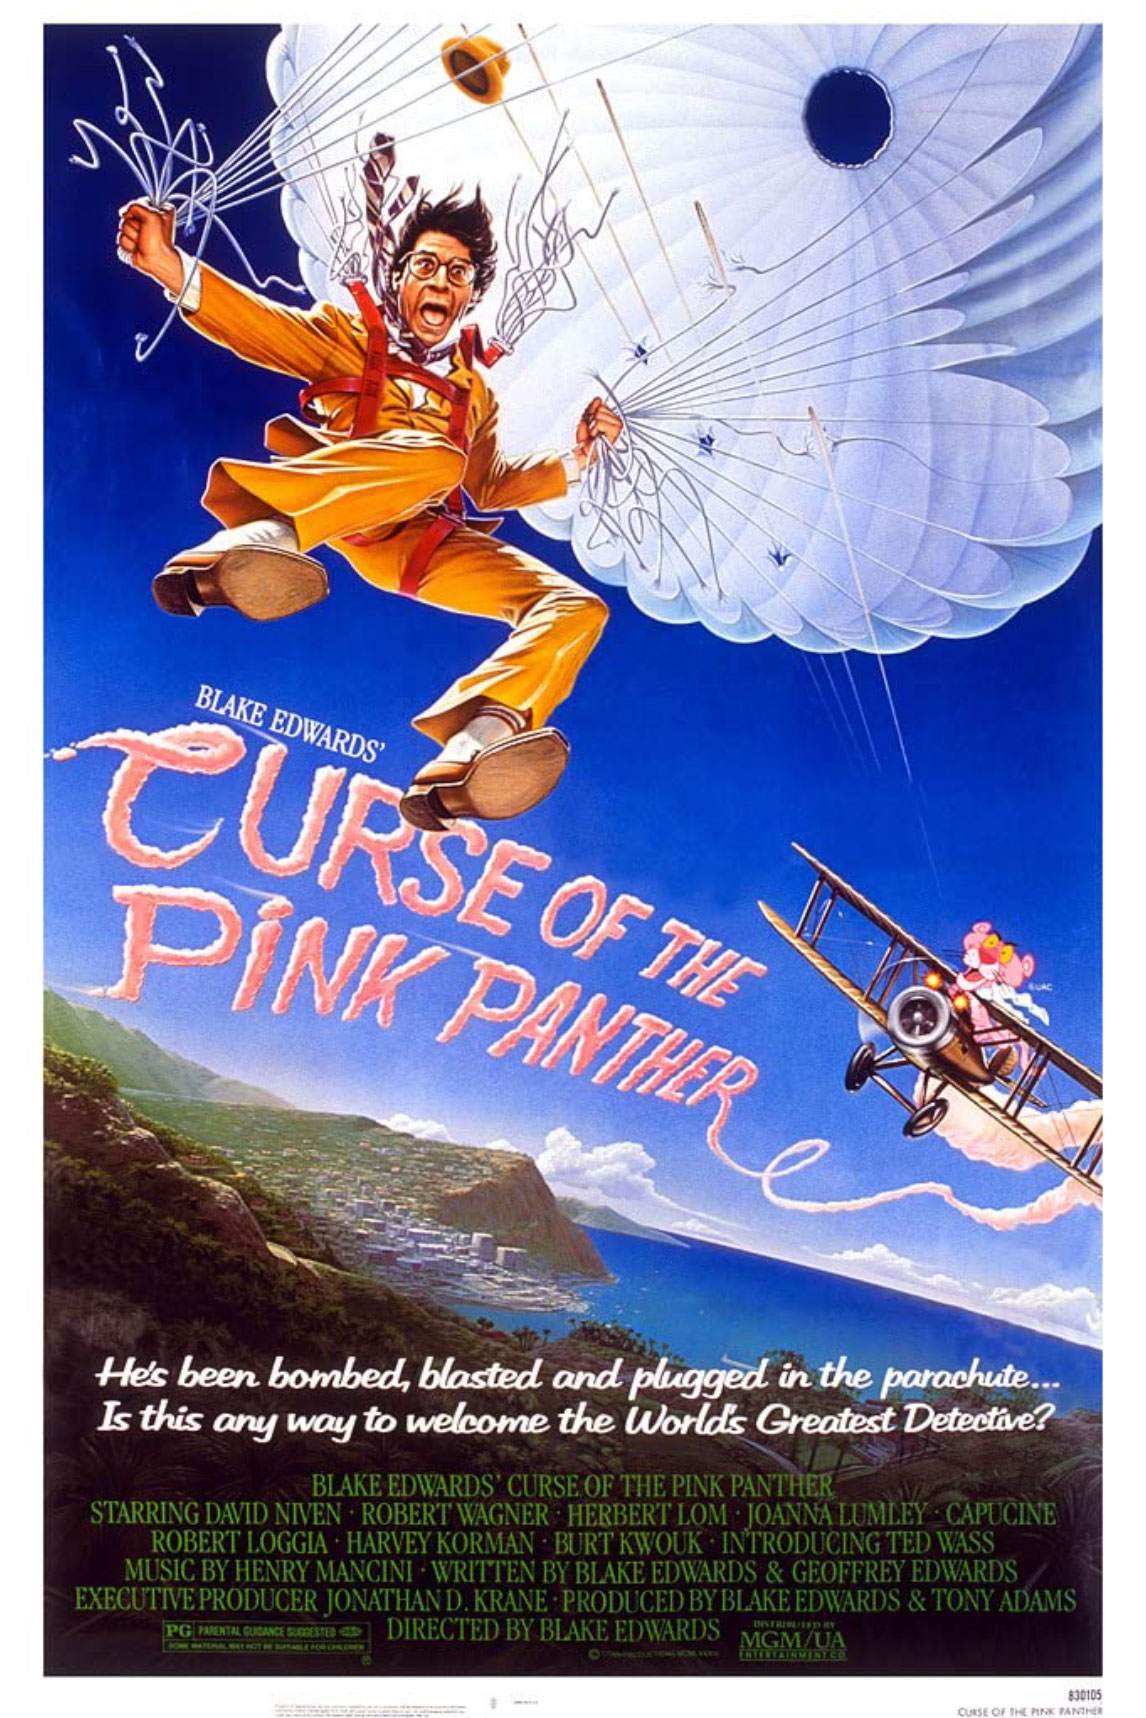 Plakatmotiv (US): The Curse of the Pink Panther (1983)